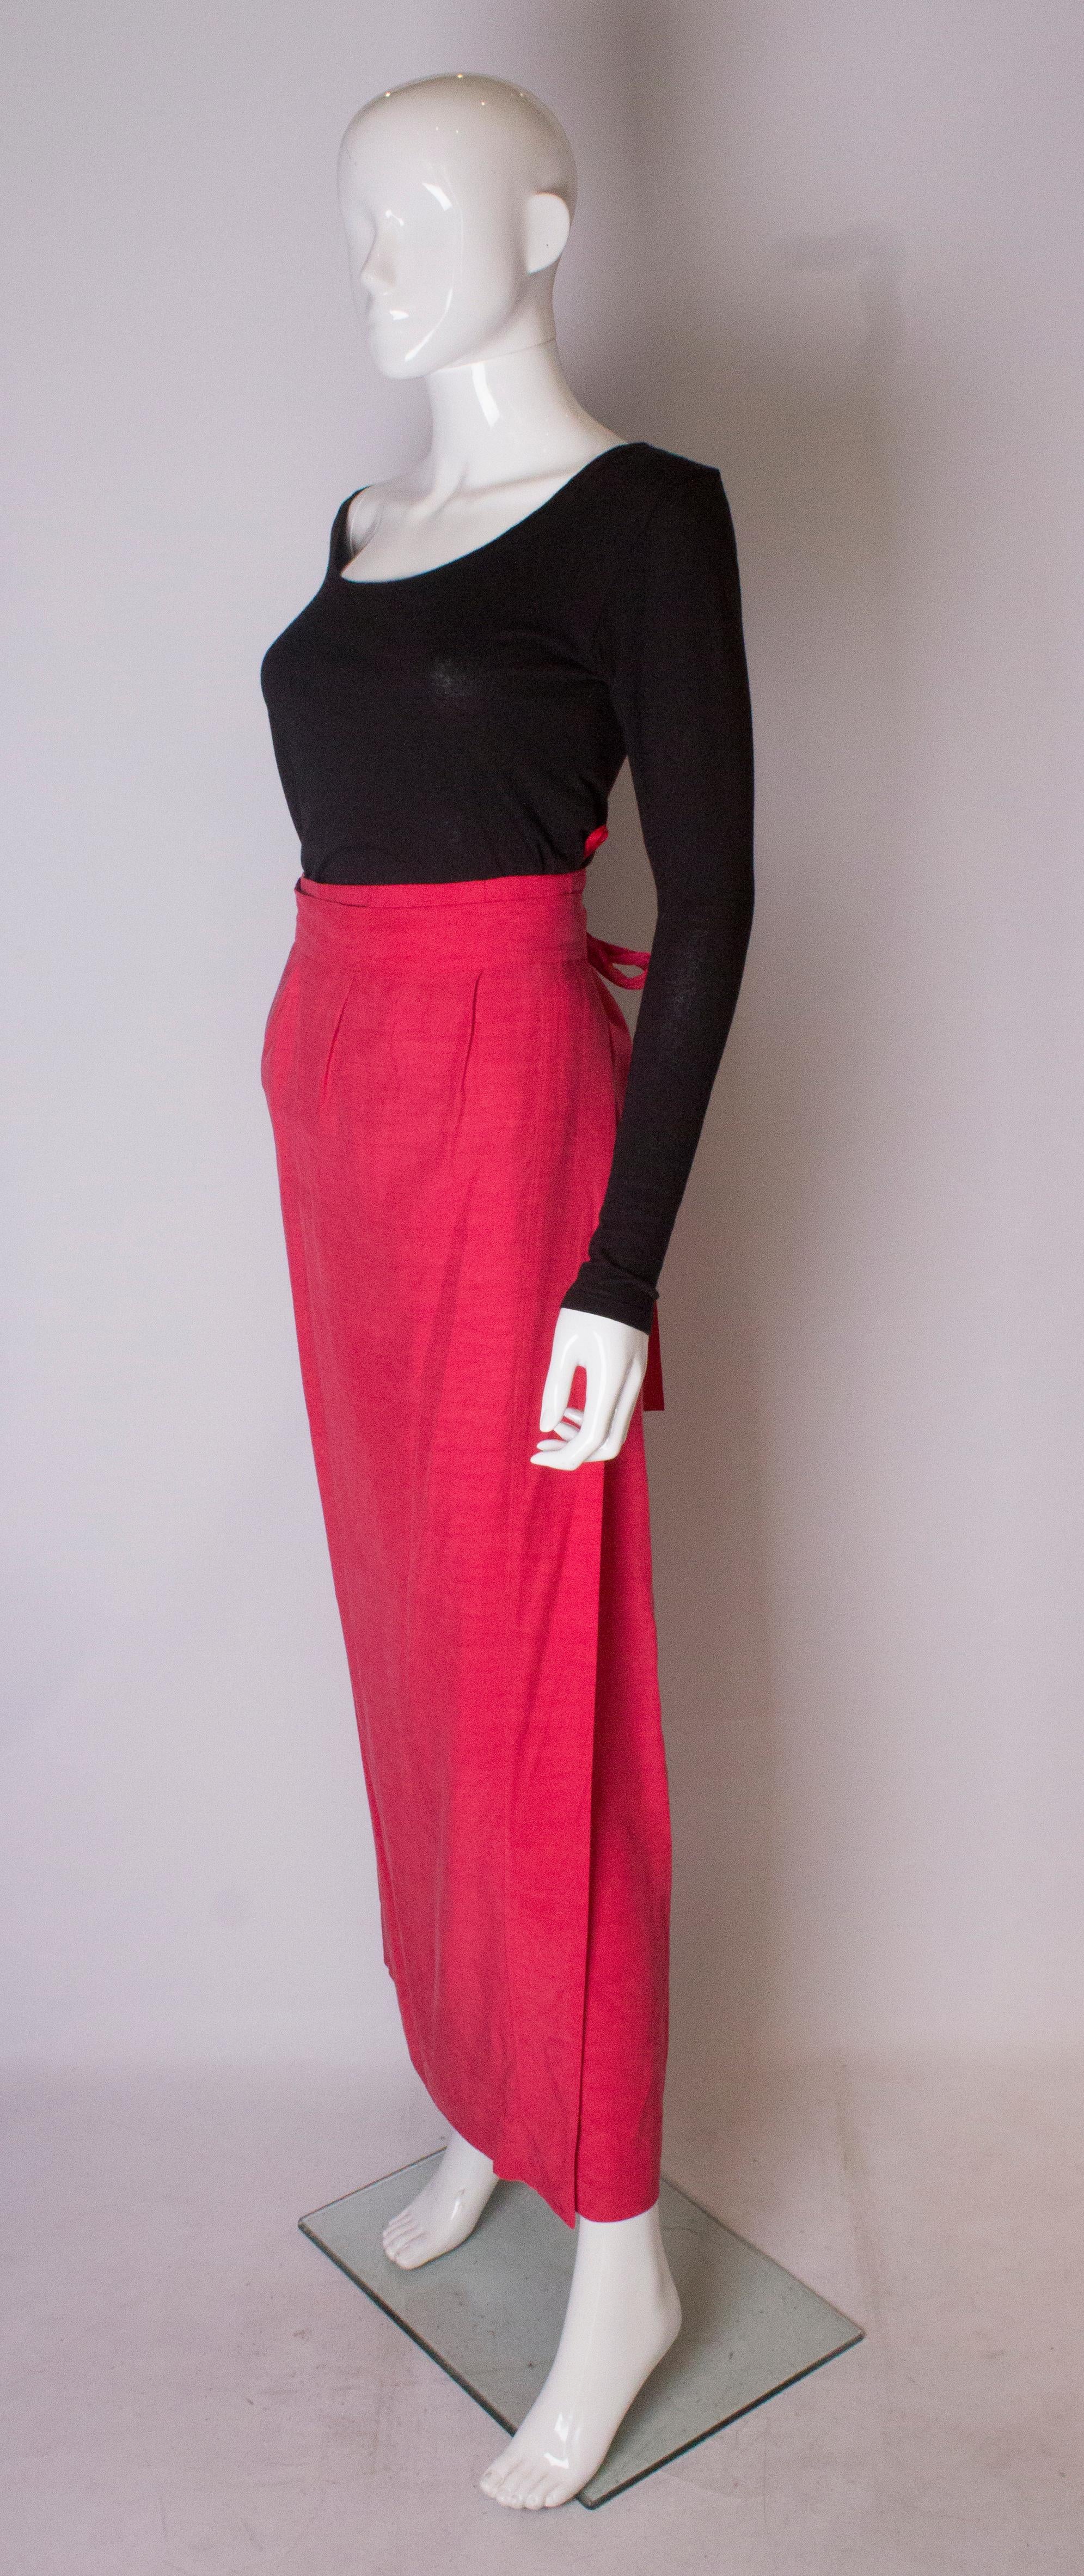 Vintage Yves Saint Laurent Rive Gauche Raspberry Pink Skirt In Good Condition For Sale In London, GB